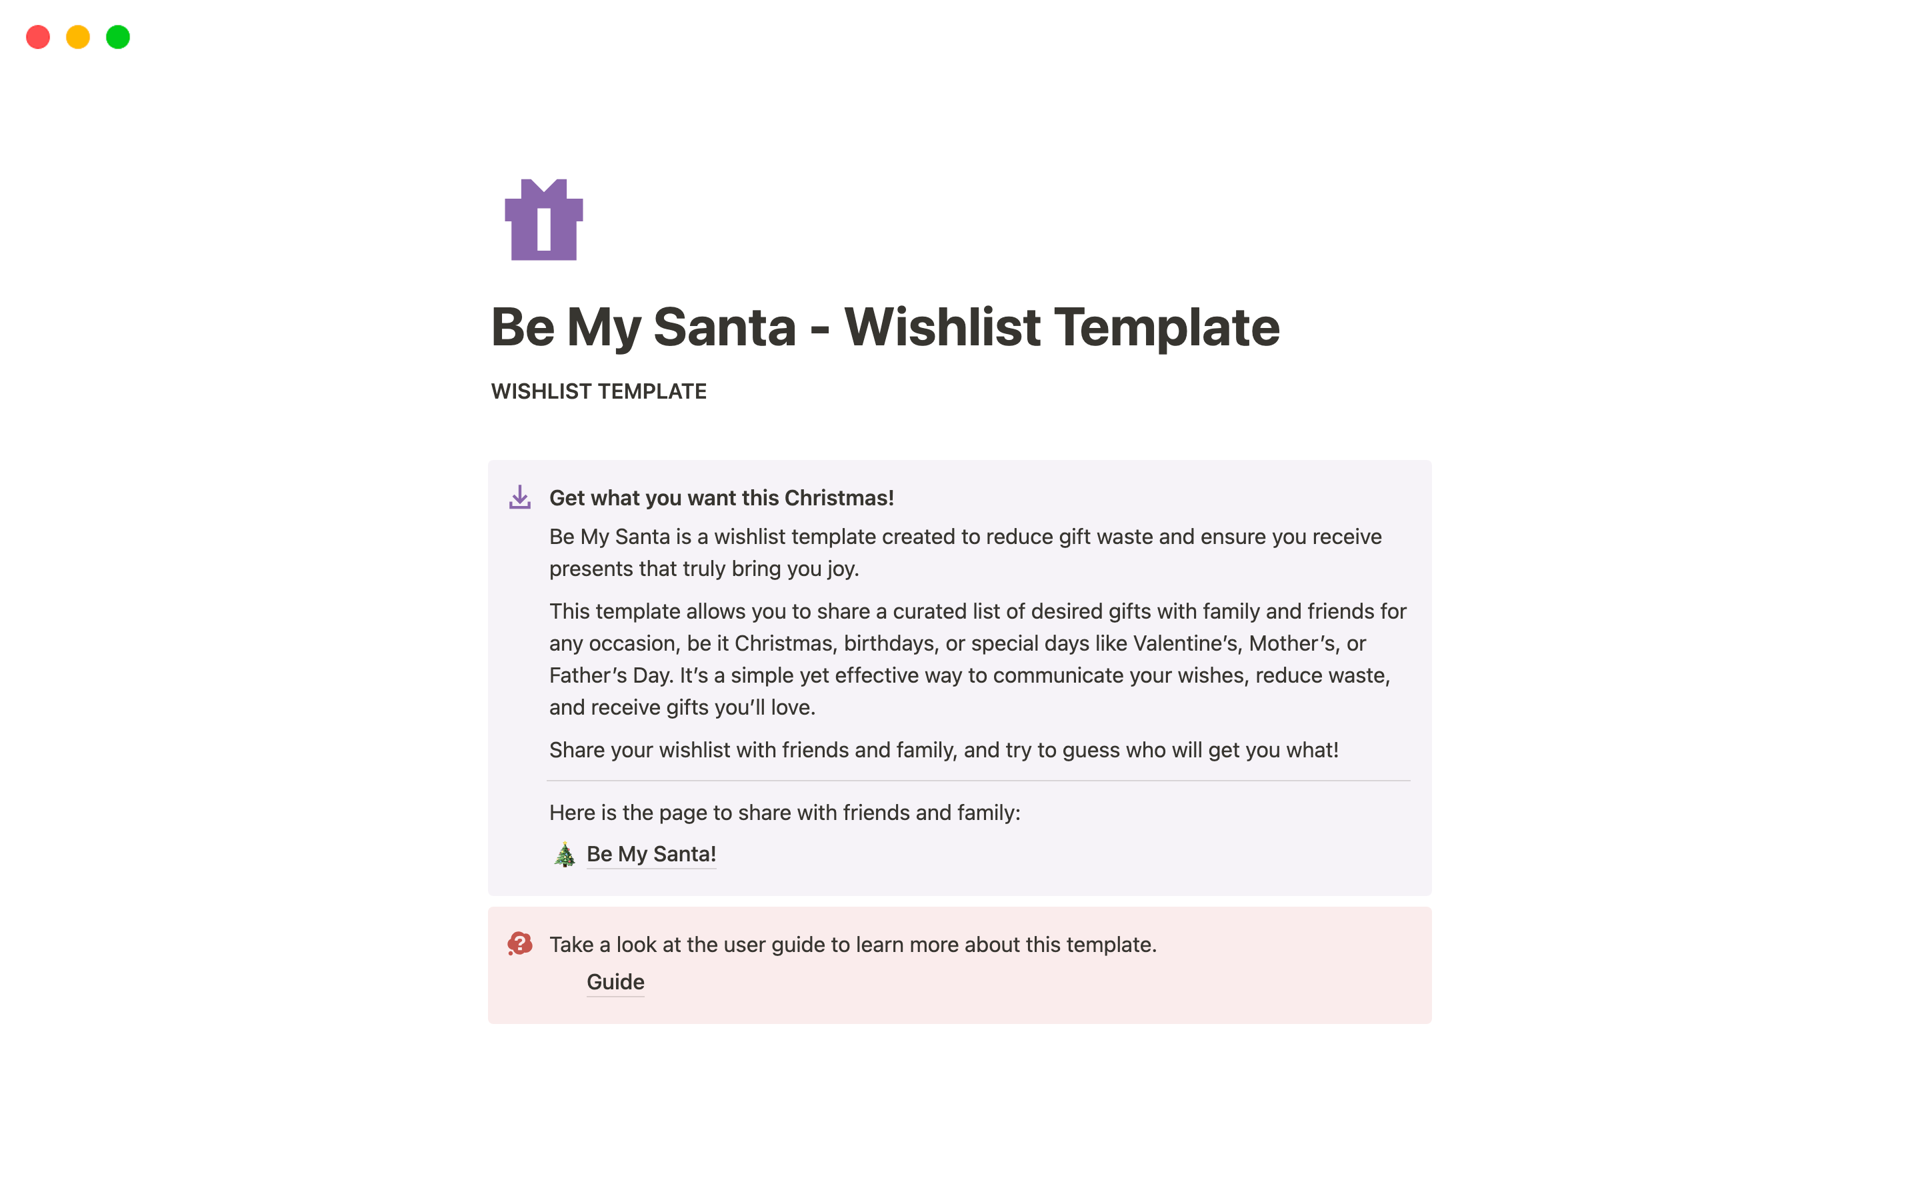 Be My Santa is a wishlist template created to reduce gift waste and ensure you receive presents that truly bring you joy. 